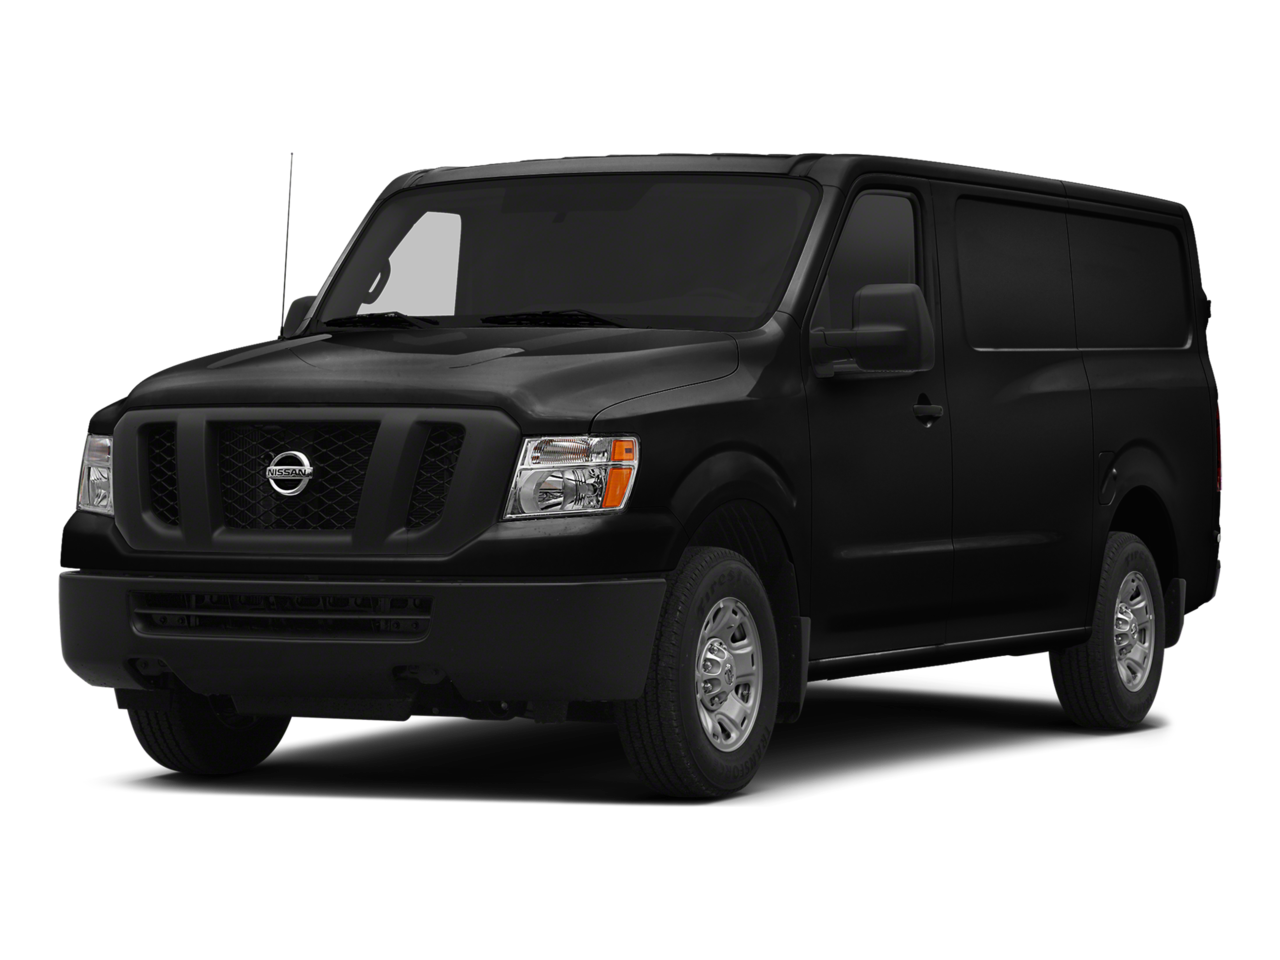 2015 Nissan NV1500 Repair: Service and Maintenance Cost